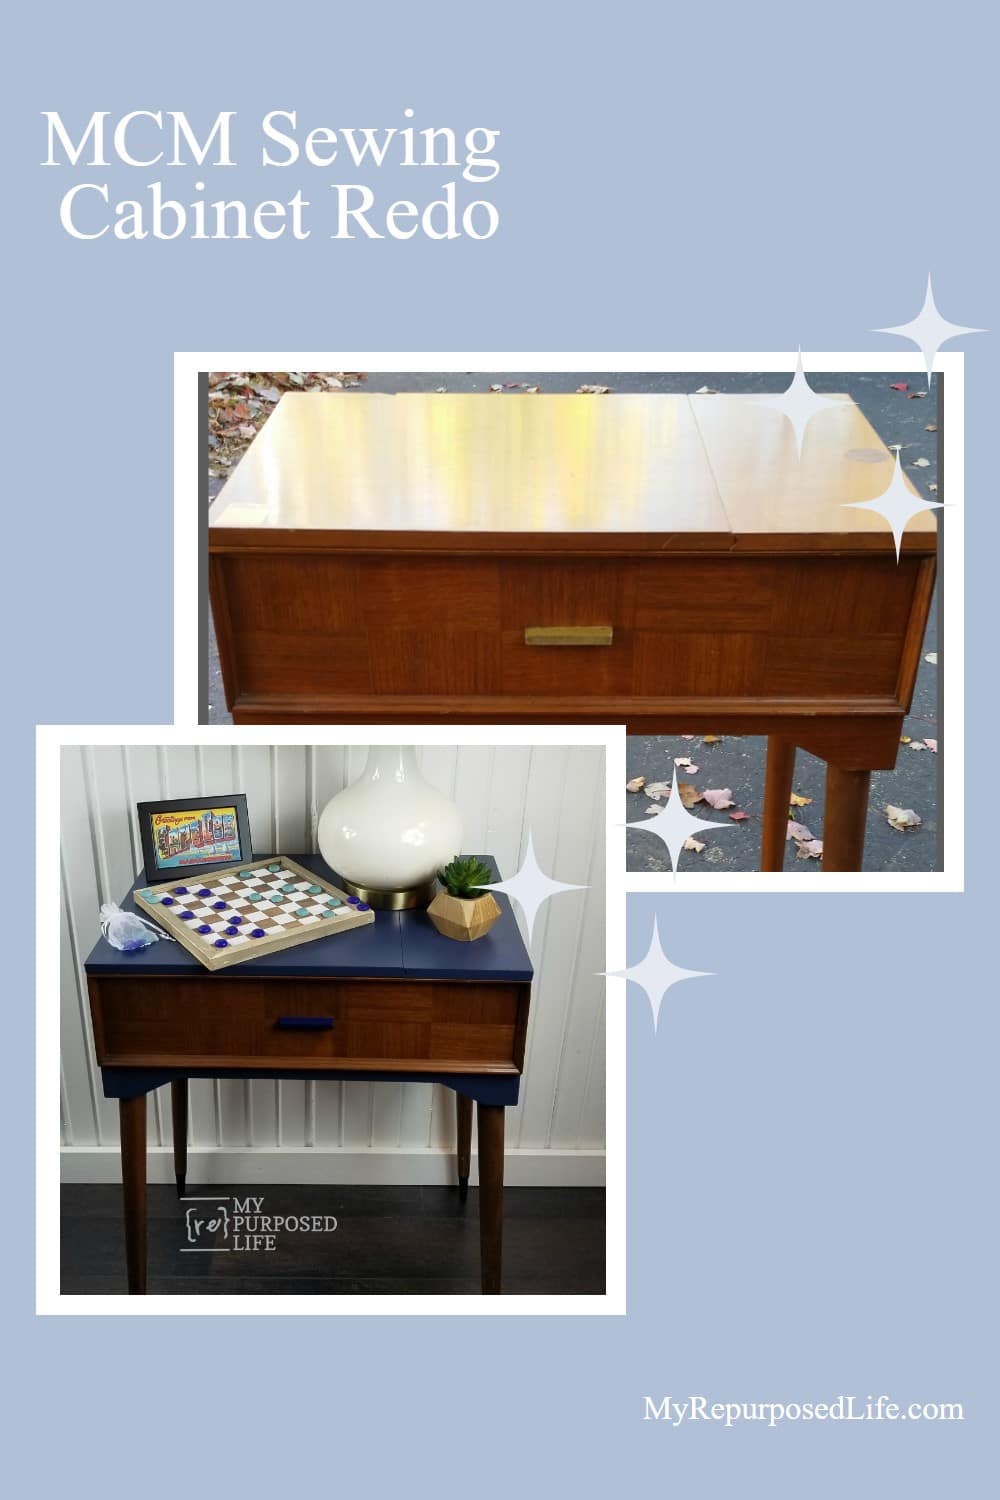 You will love this mid century modern sewing cabinet makeover. Leaving the wood tones with the navy blue paint makes this project glisten! You can DIY it! #MyRepurposedLife #repurposed #sewingcabinet #makeover #mcm #midcenturymodern #furniture via @repurposedlife